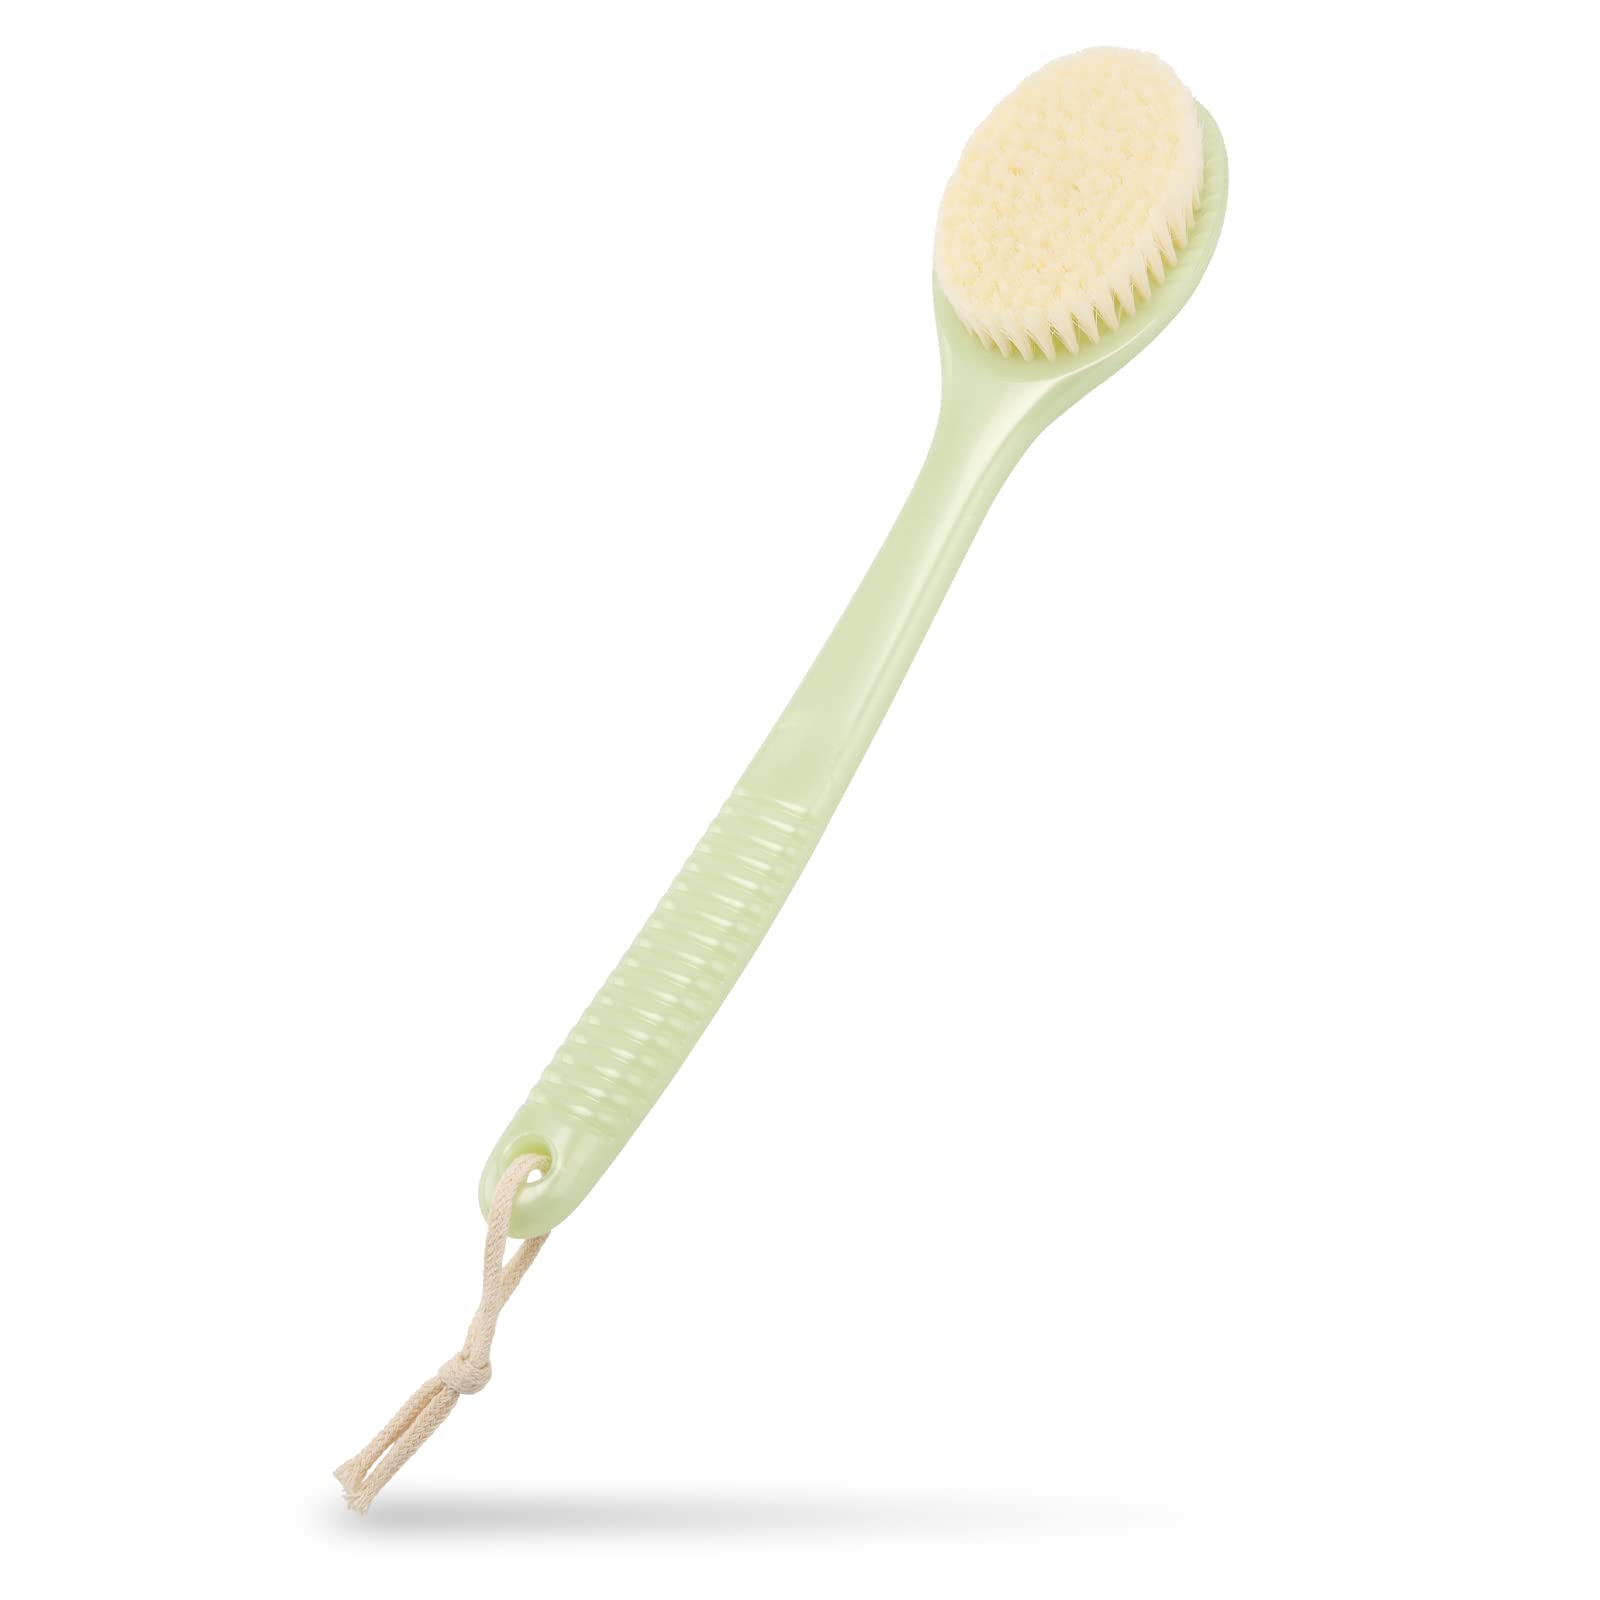 G2PLUS Soft Bath Brush for Back with Long Handle, Body Shower Brush, Exfoliating Back Scrubber for Wet or Dry Brushing (Green)